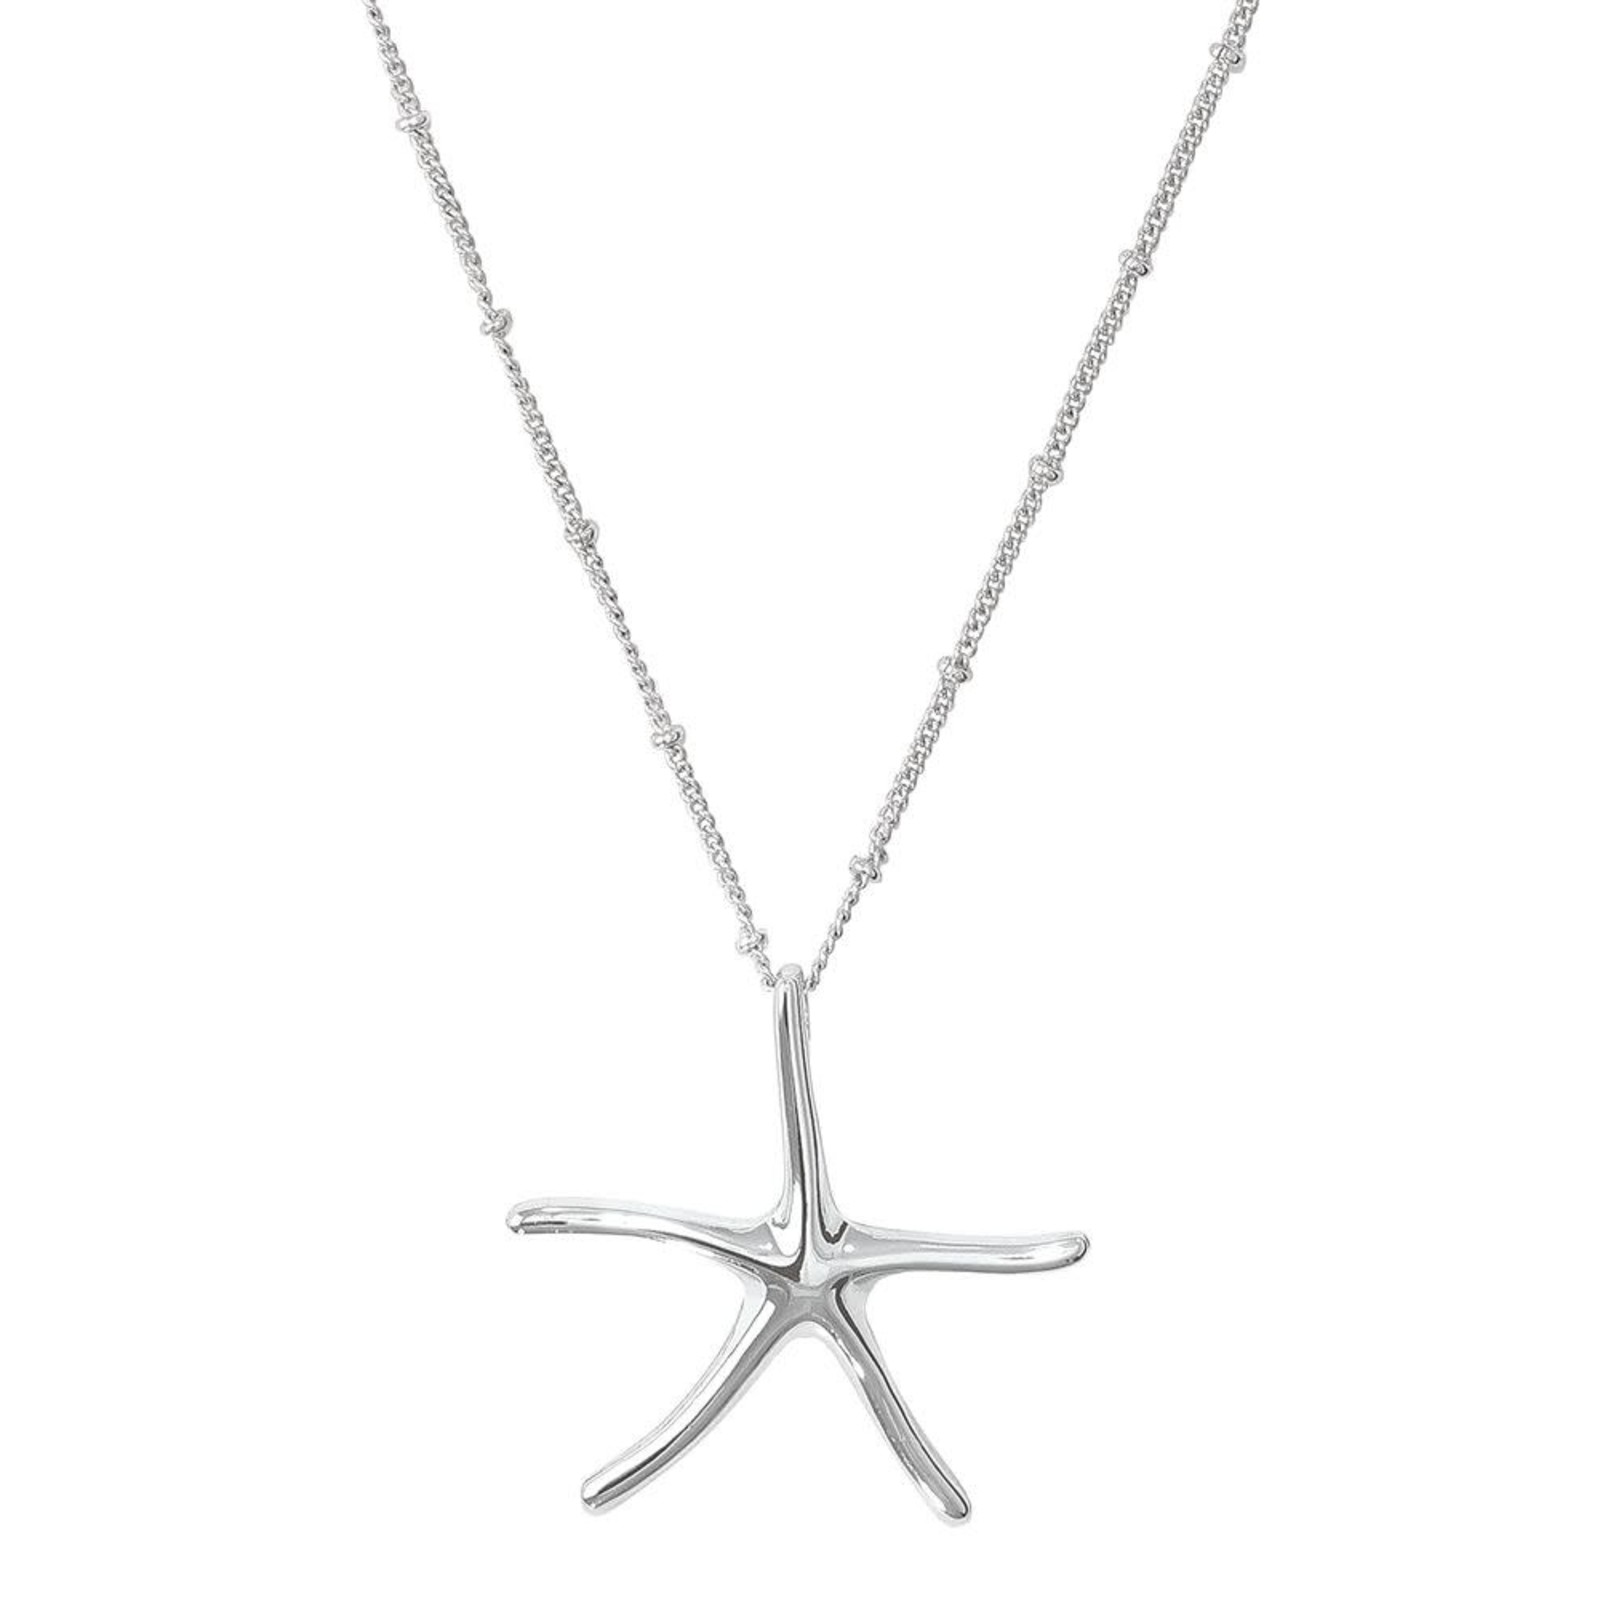 Periwinkle by Barlow Necklace-Classic Silver Starfish   8151112 loading=